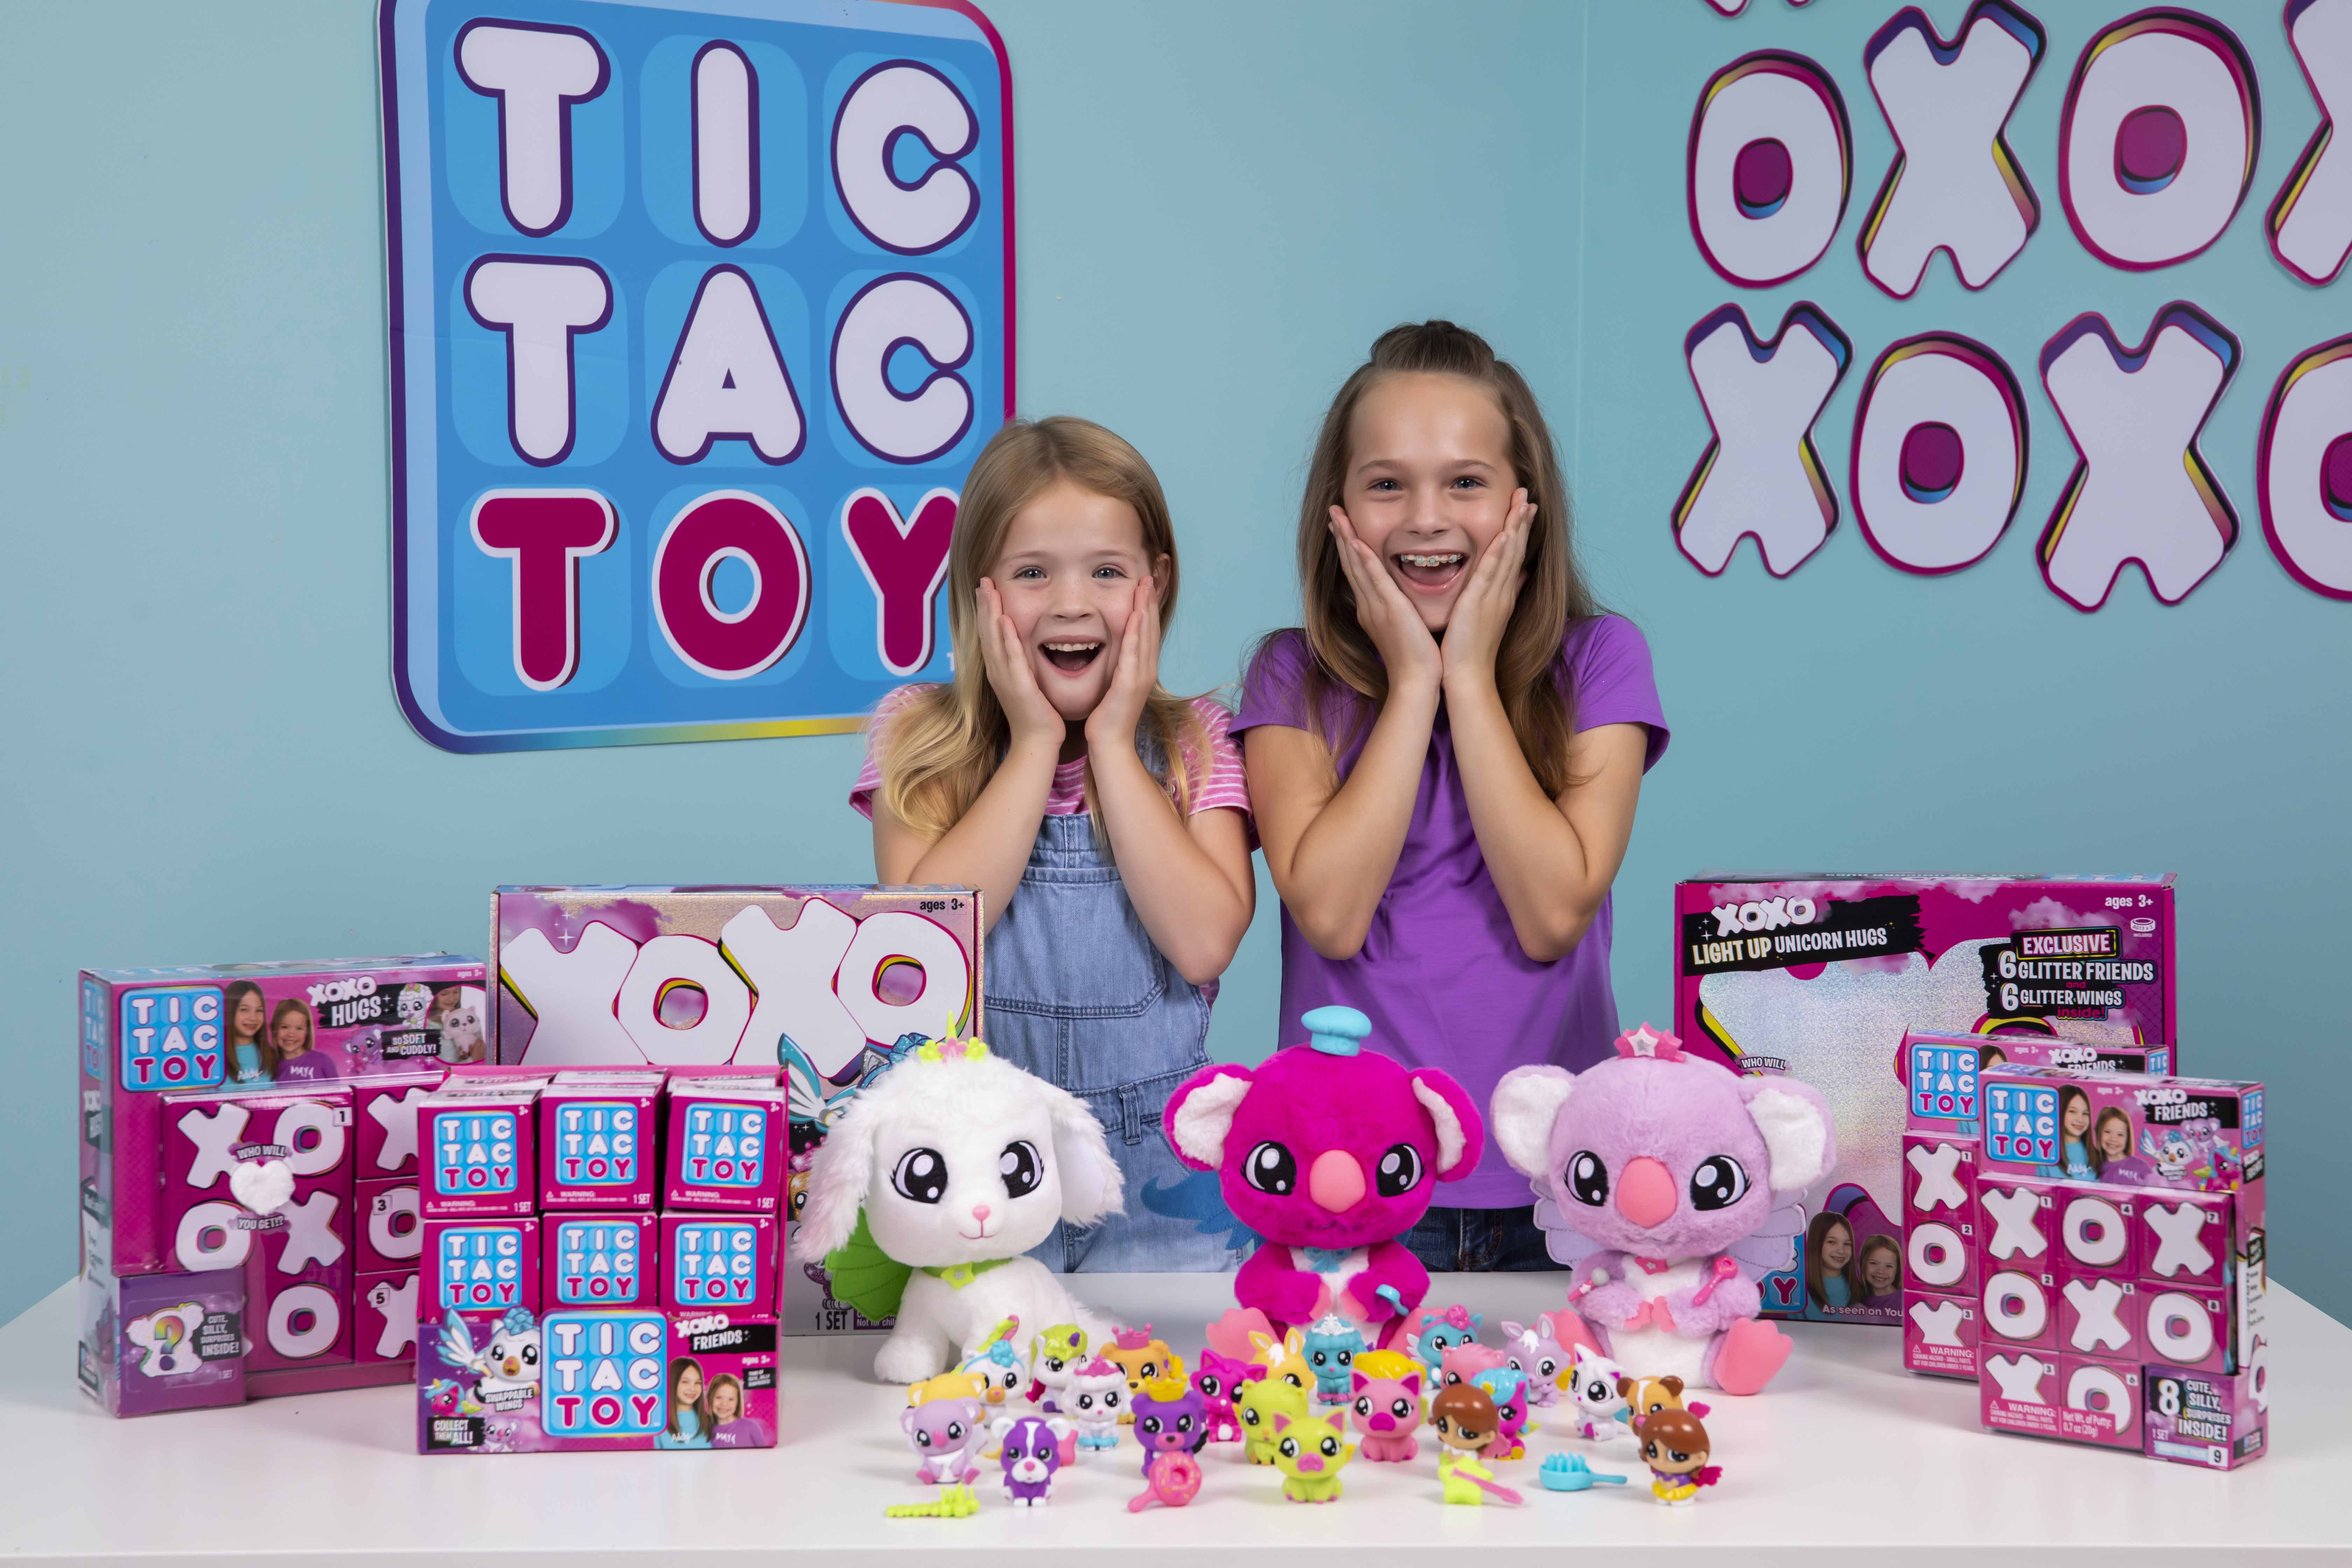 Tic Tac Toy XOXO Exclusive Glitter Friends - image 3 of 5